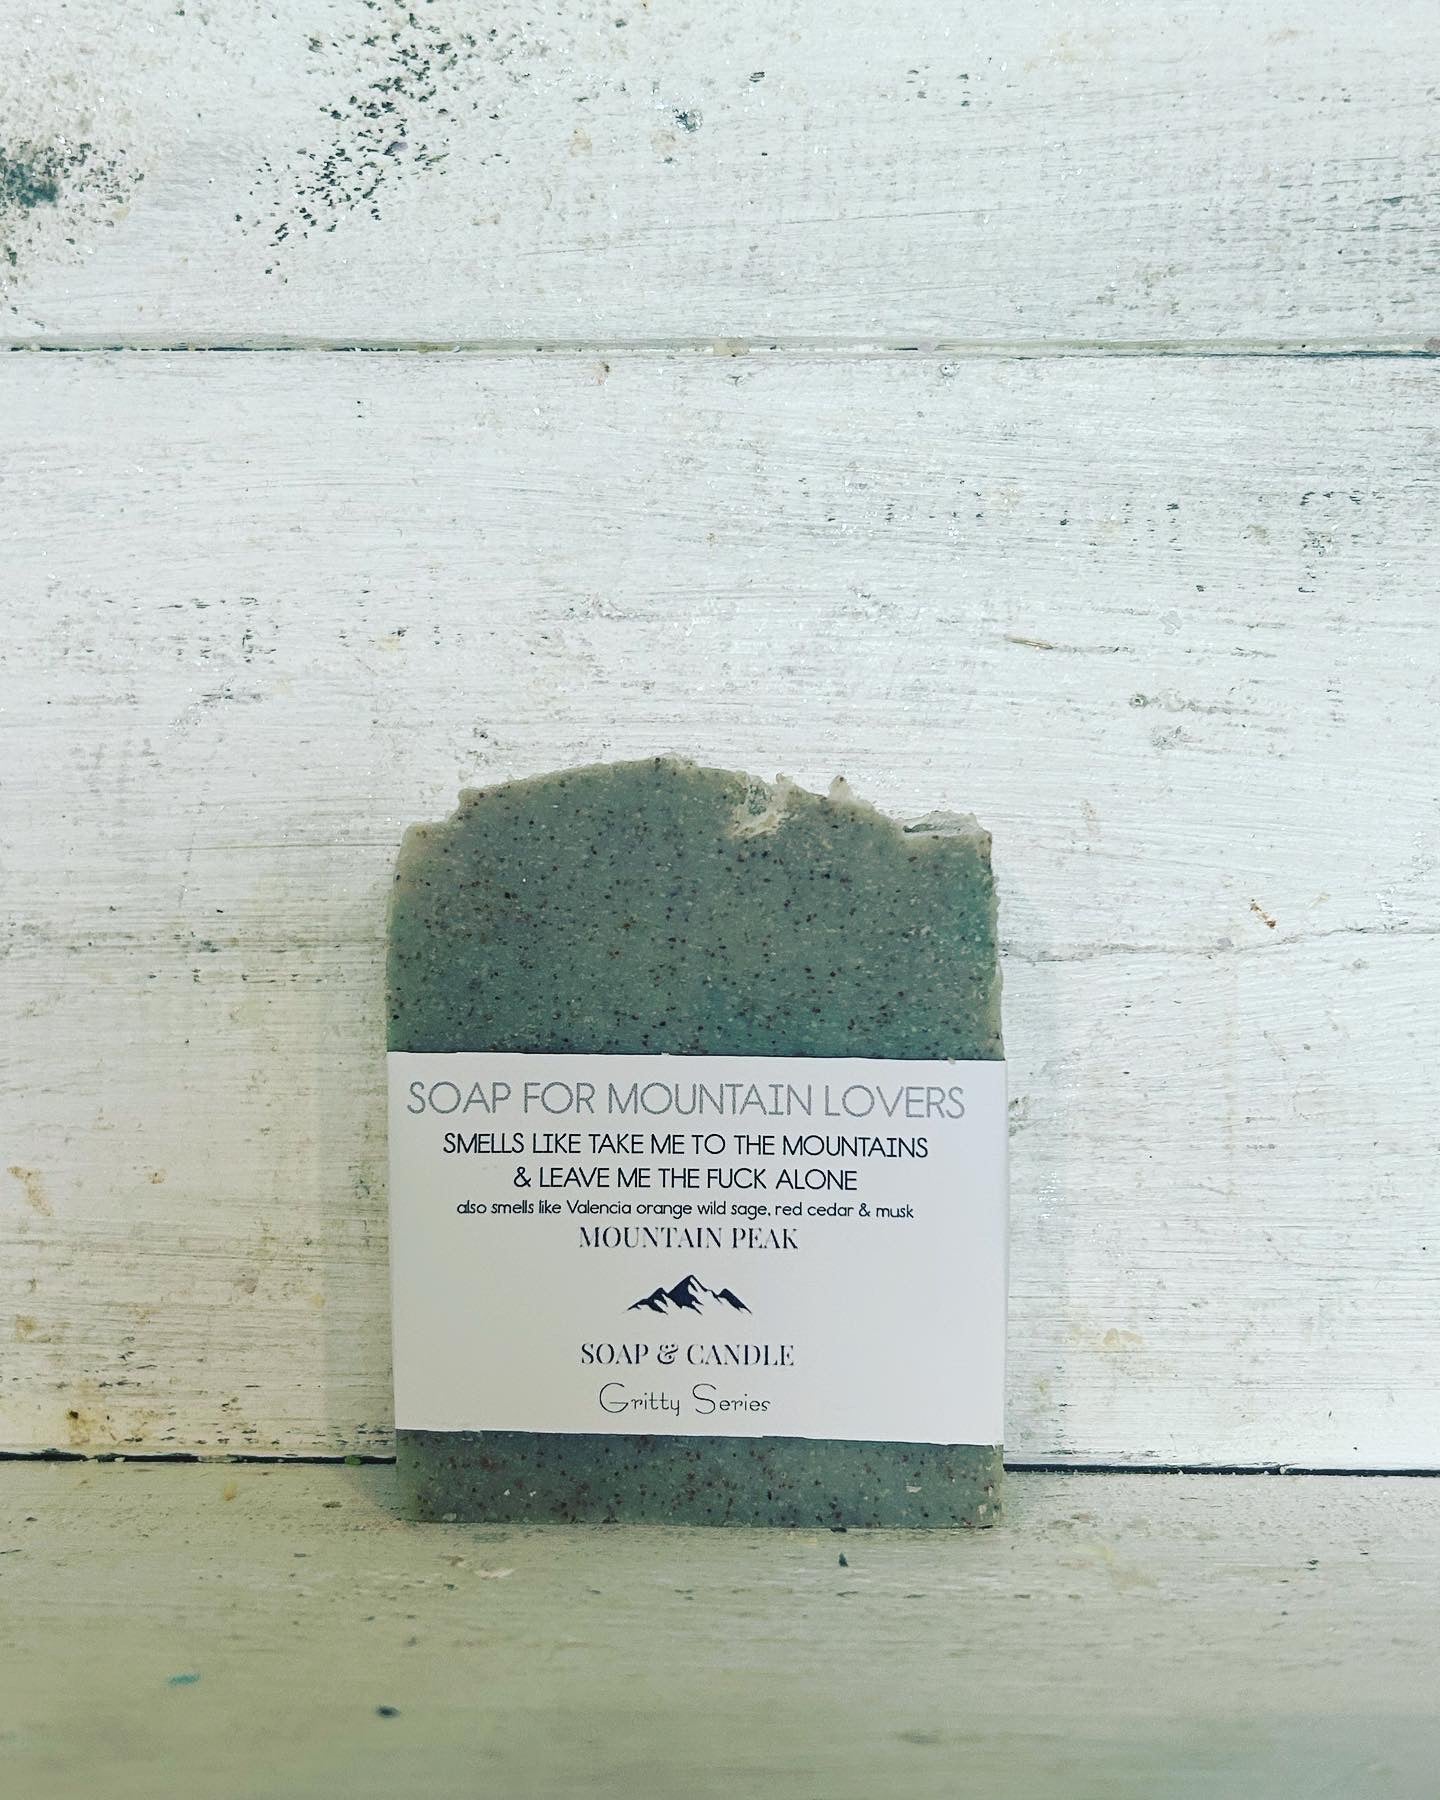 Soap for Mountain lovers